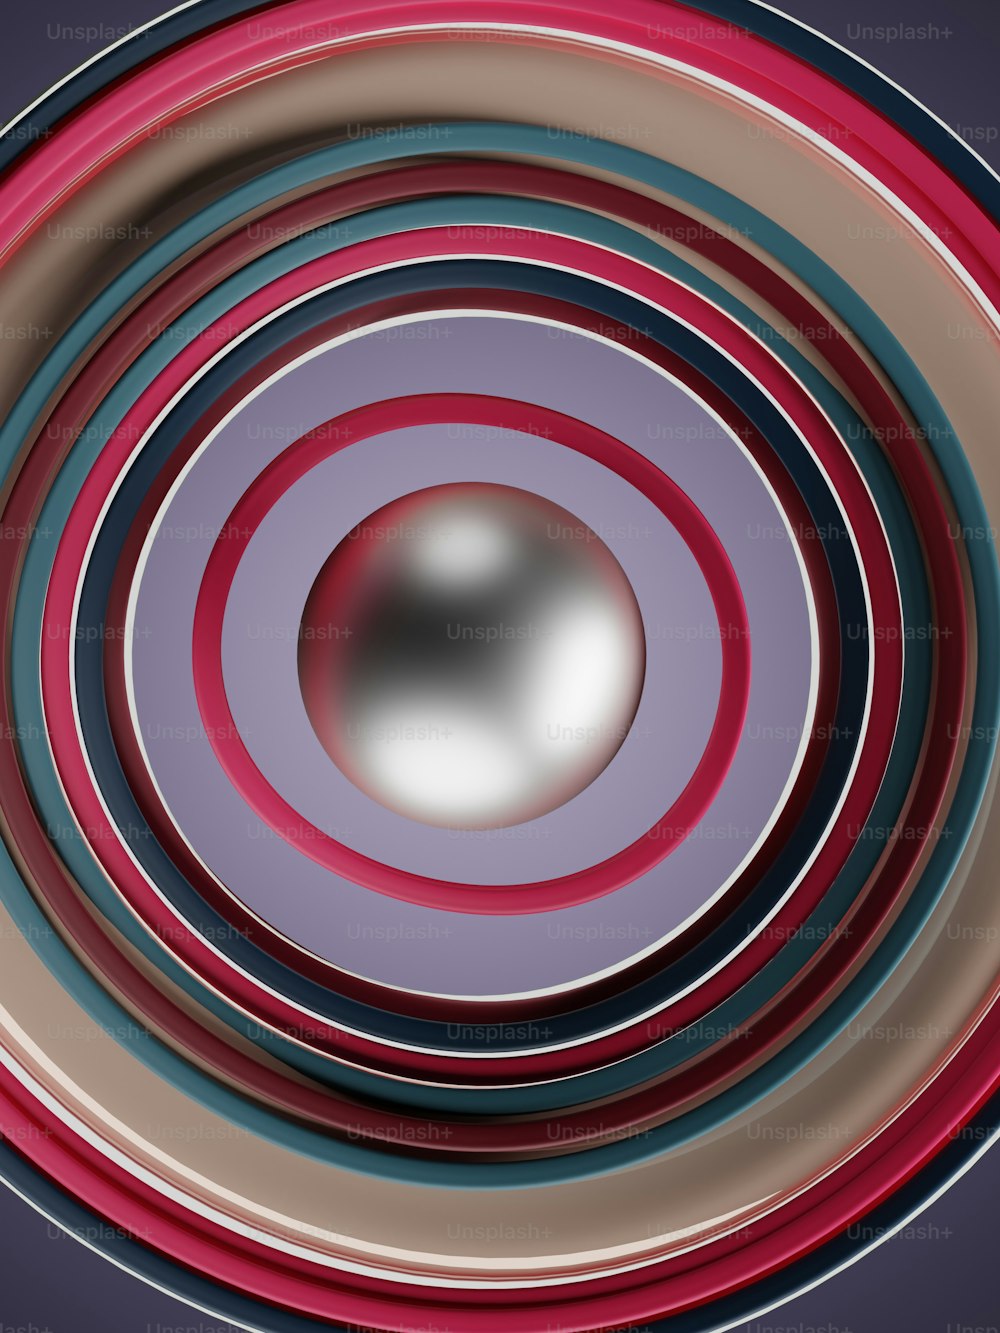 a picture of a circular object with a blurry background